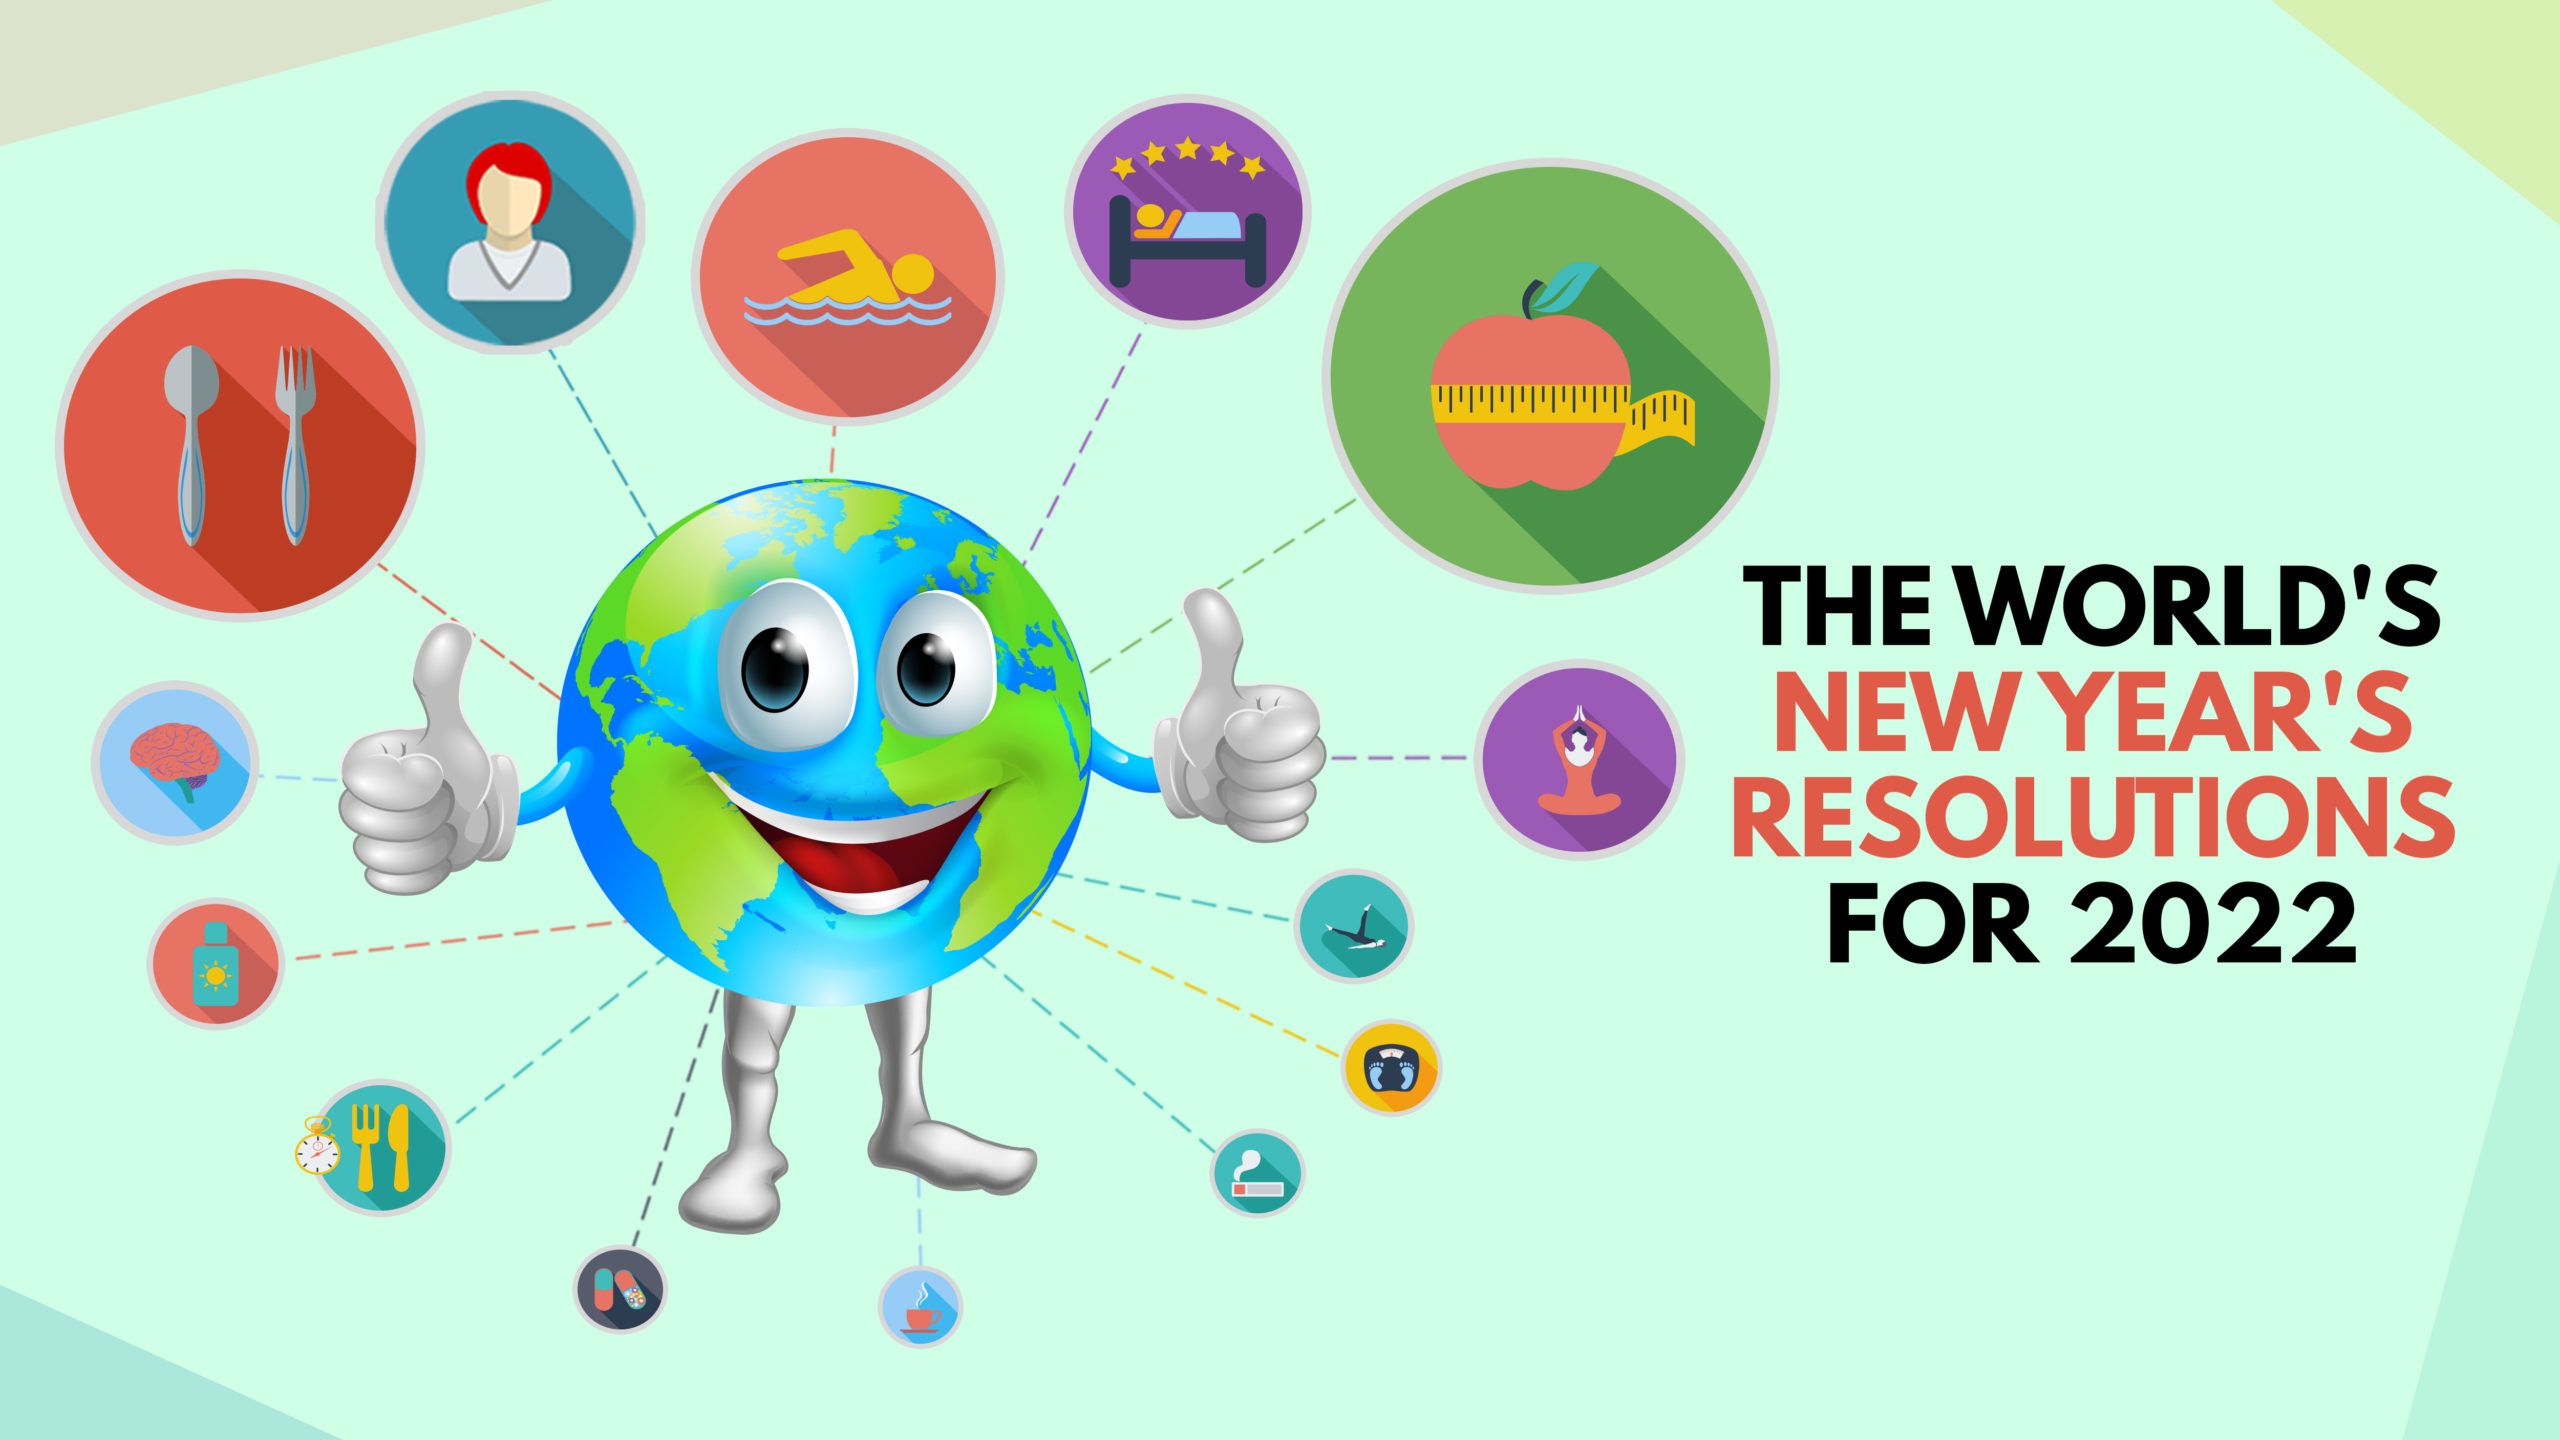 NEW YEAR, NEW ME - TOP NEW YEAR'S RESOLUTIONS FROM AROUND THE WORLD